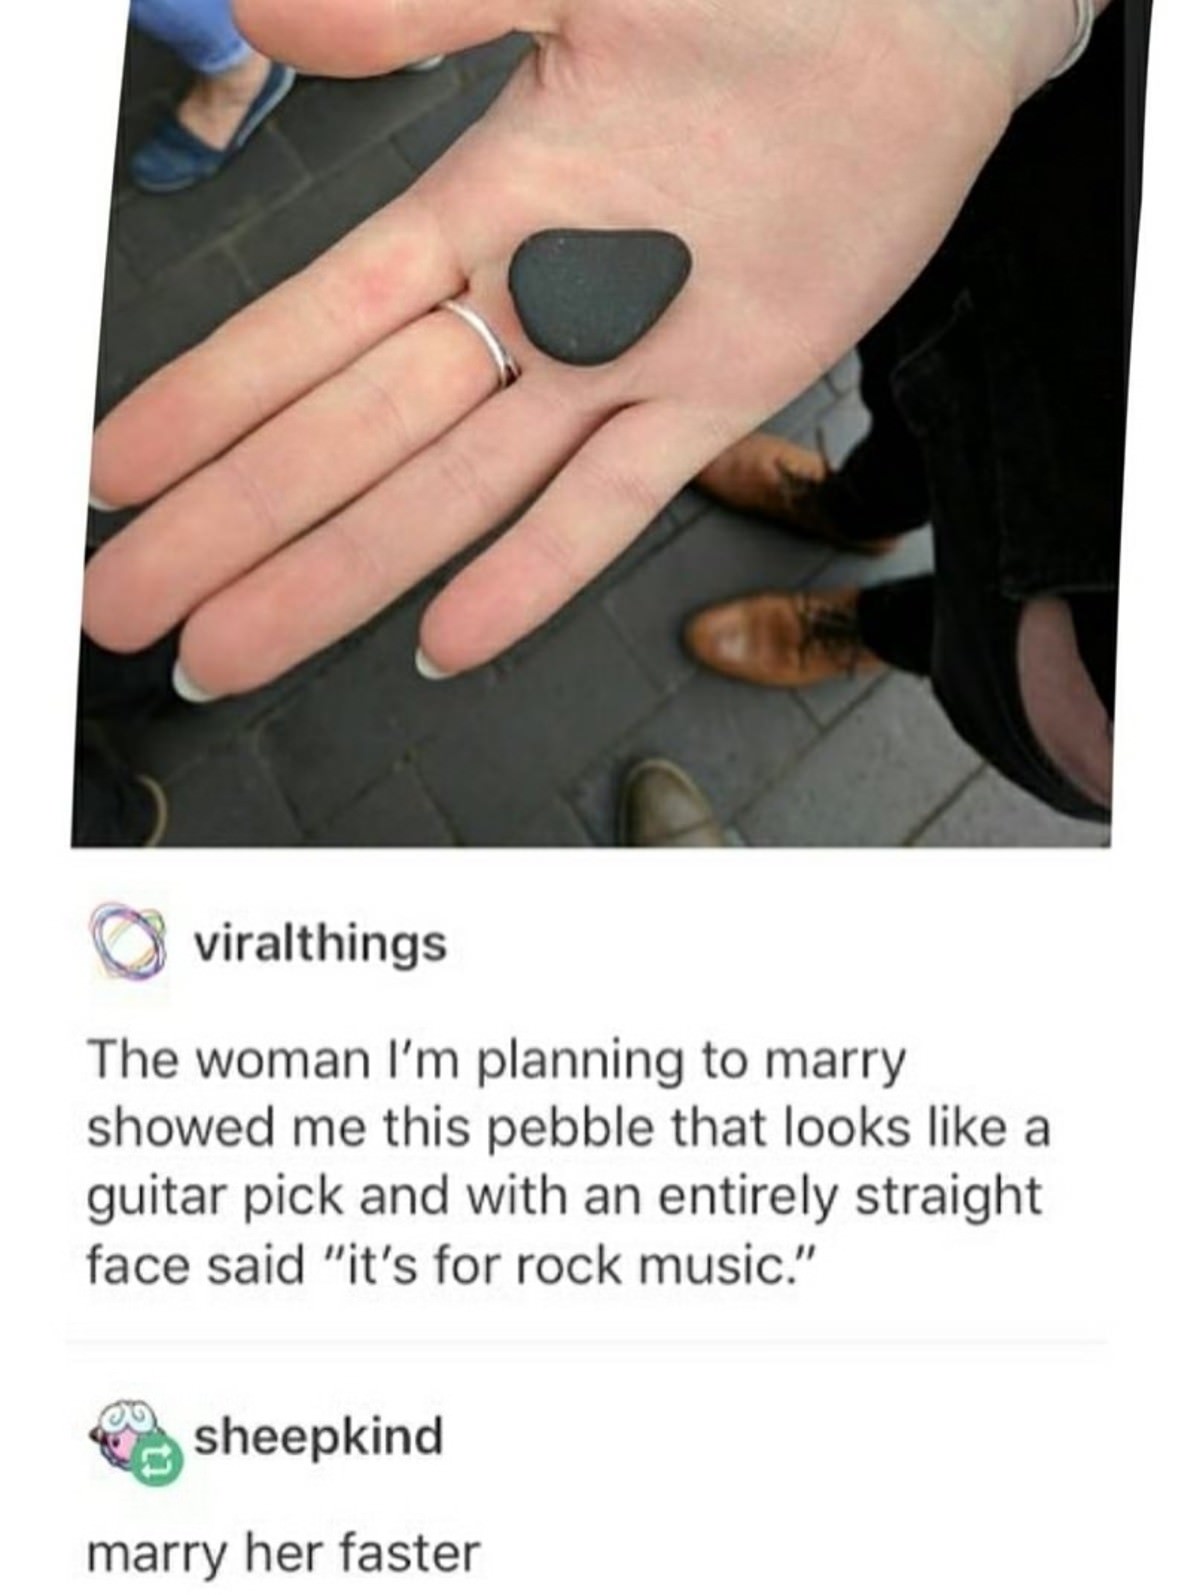 memes - marry her faster - O viralthings The woman I'm planning to marry showed me this pebble that looks a guitar pick and with an entirely straight face said "it's for rock music." sheepkind marry her faster